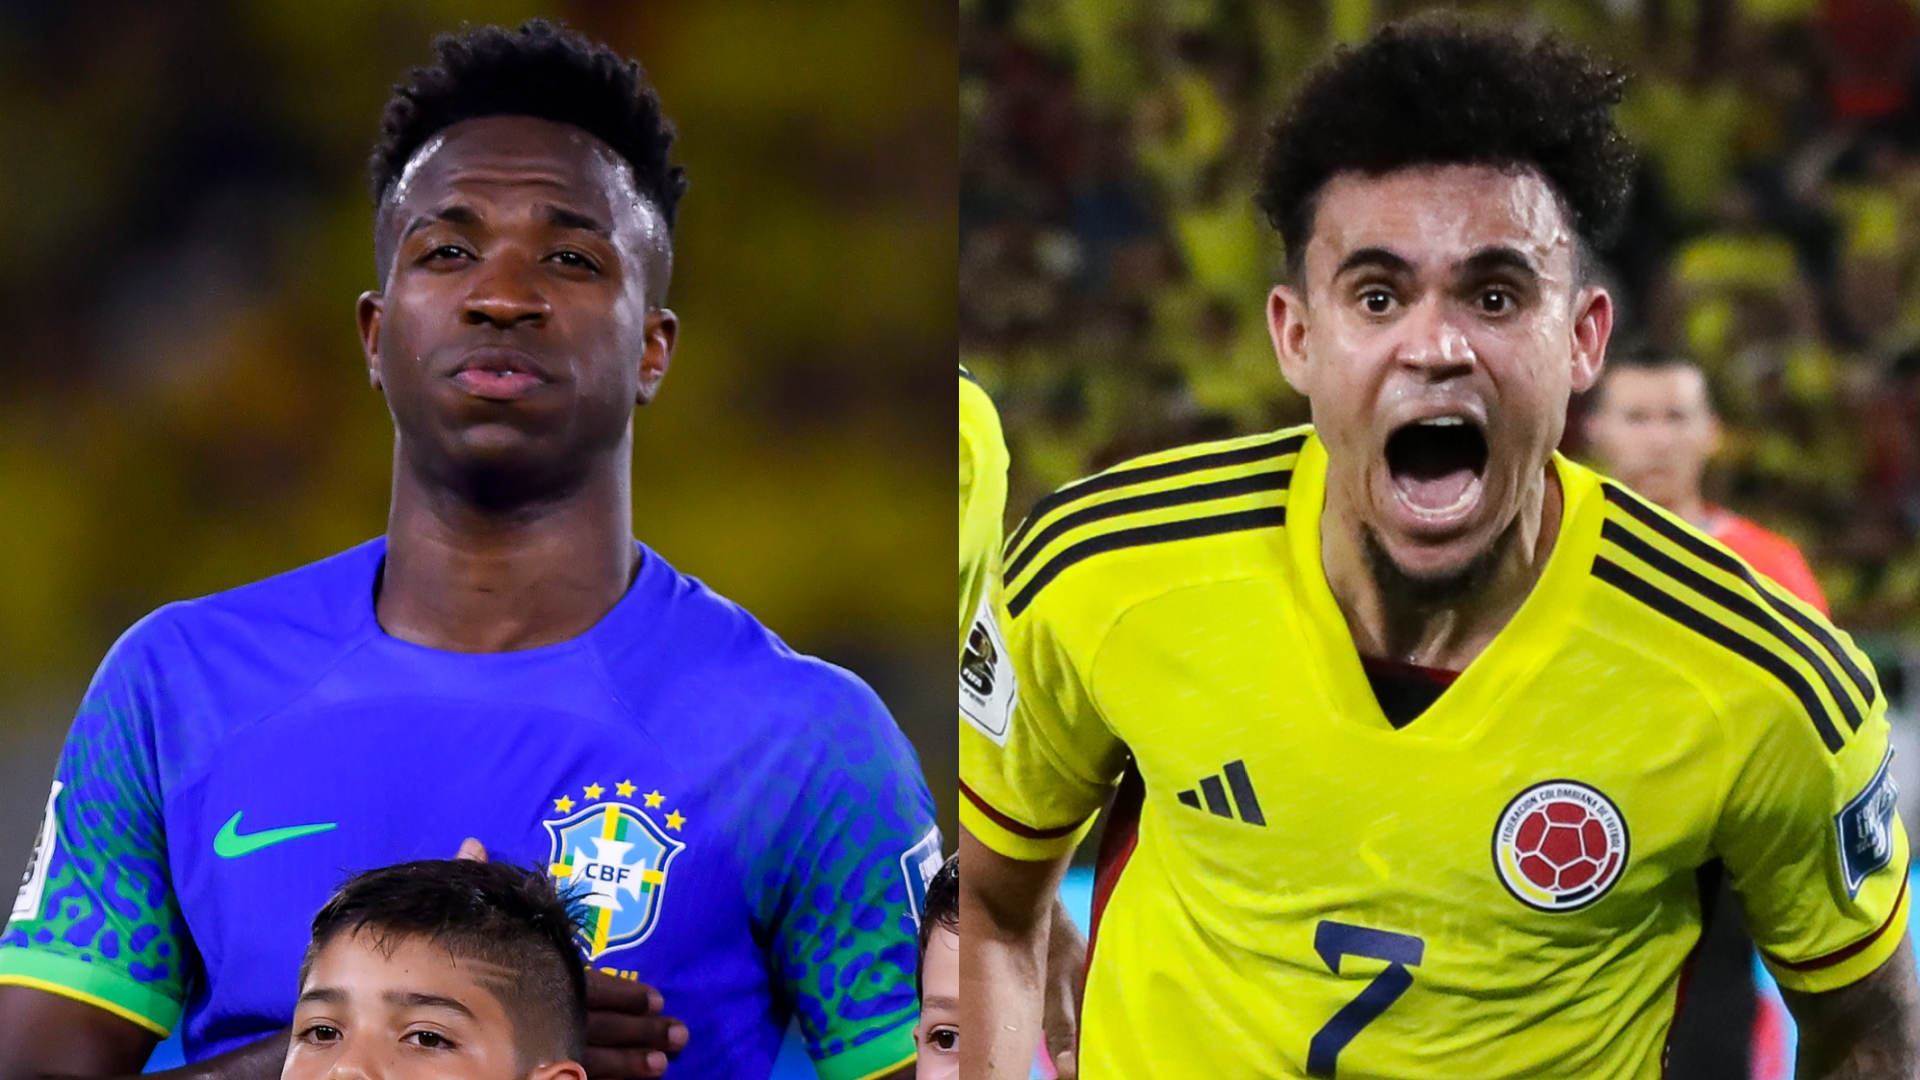 Brazil player ratings vs Brazil: Where have the goals gone?! Selecao turn in toothless showing without Neymar in Colombia loss after Vinicius Jr injury | Goal.com UK